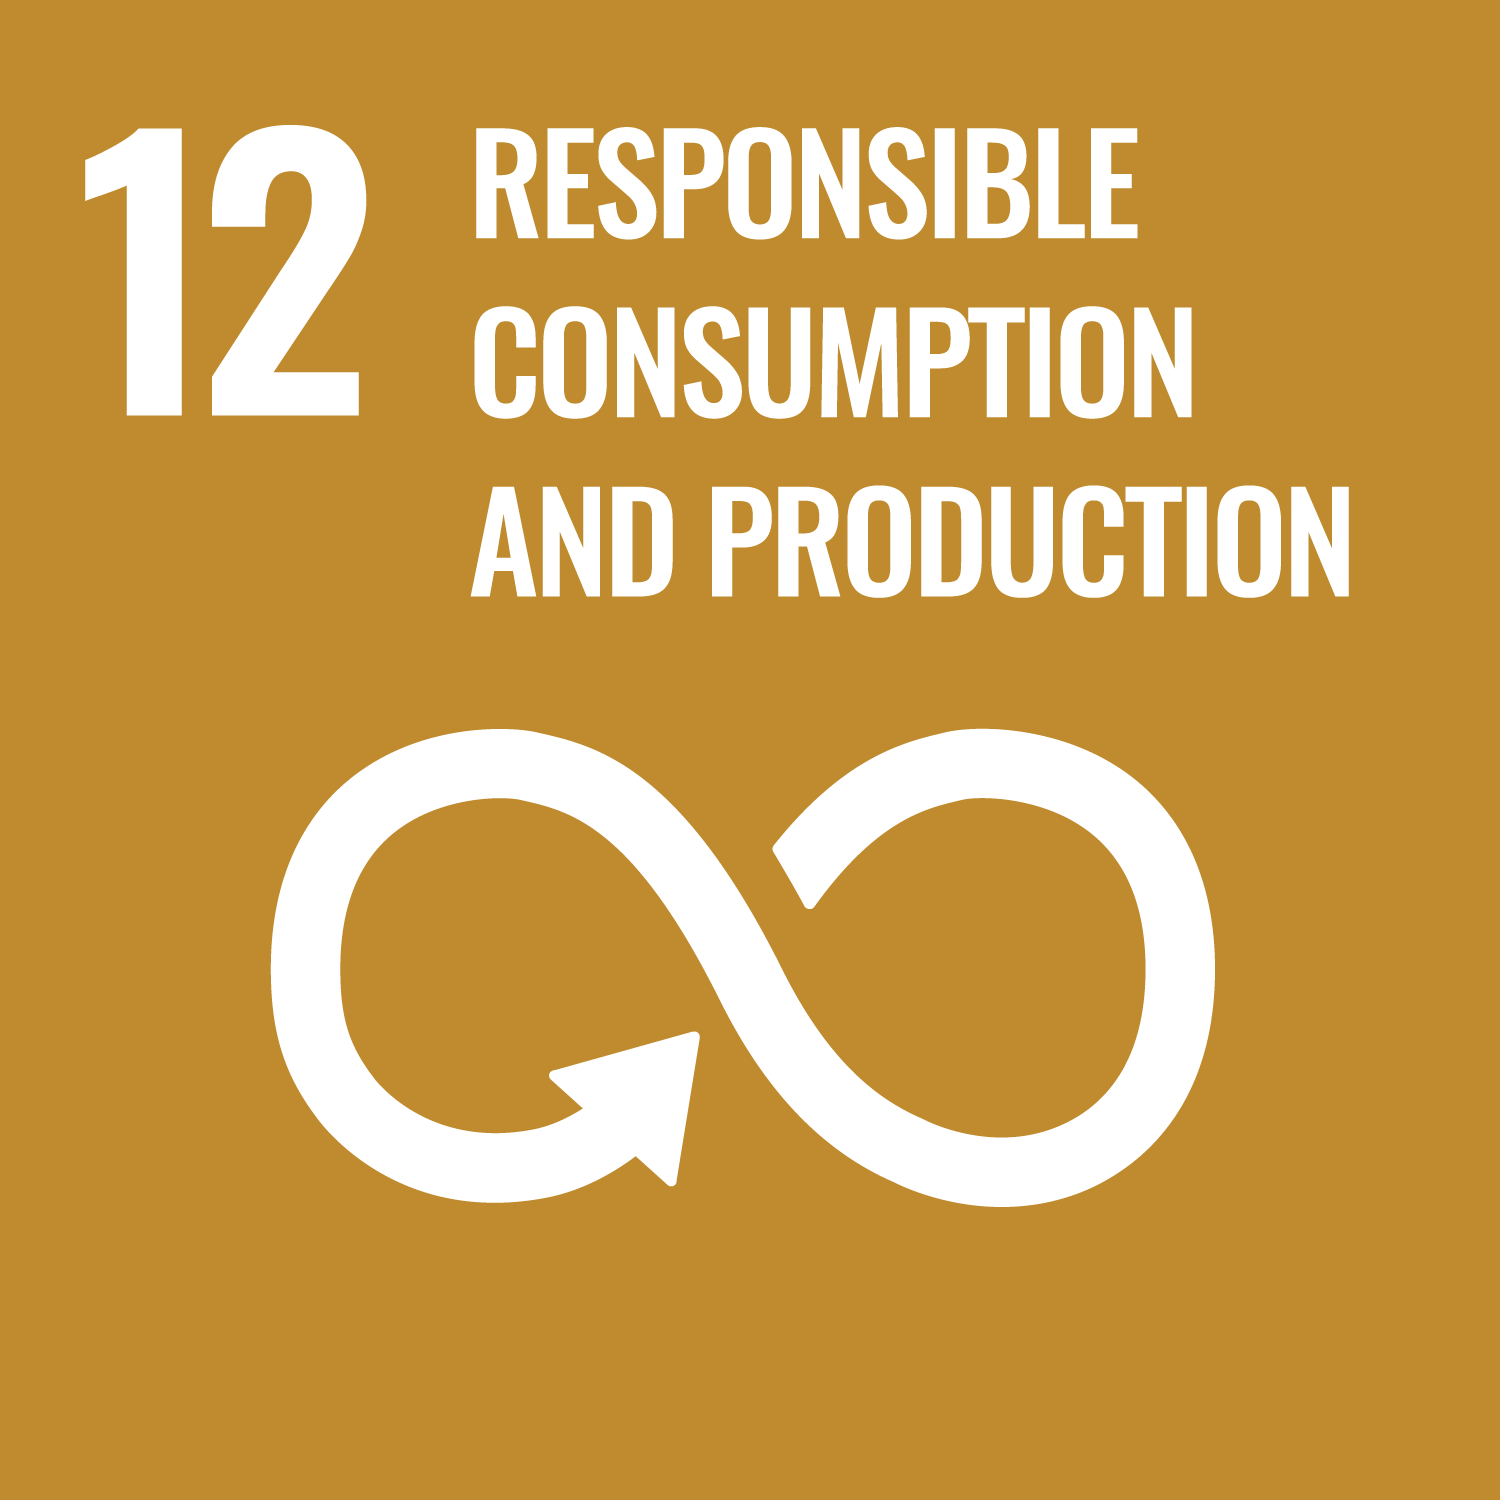 SDG 12 – Responsible consumtion and production